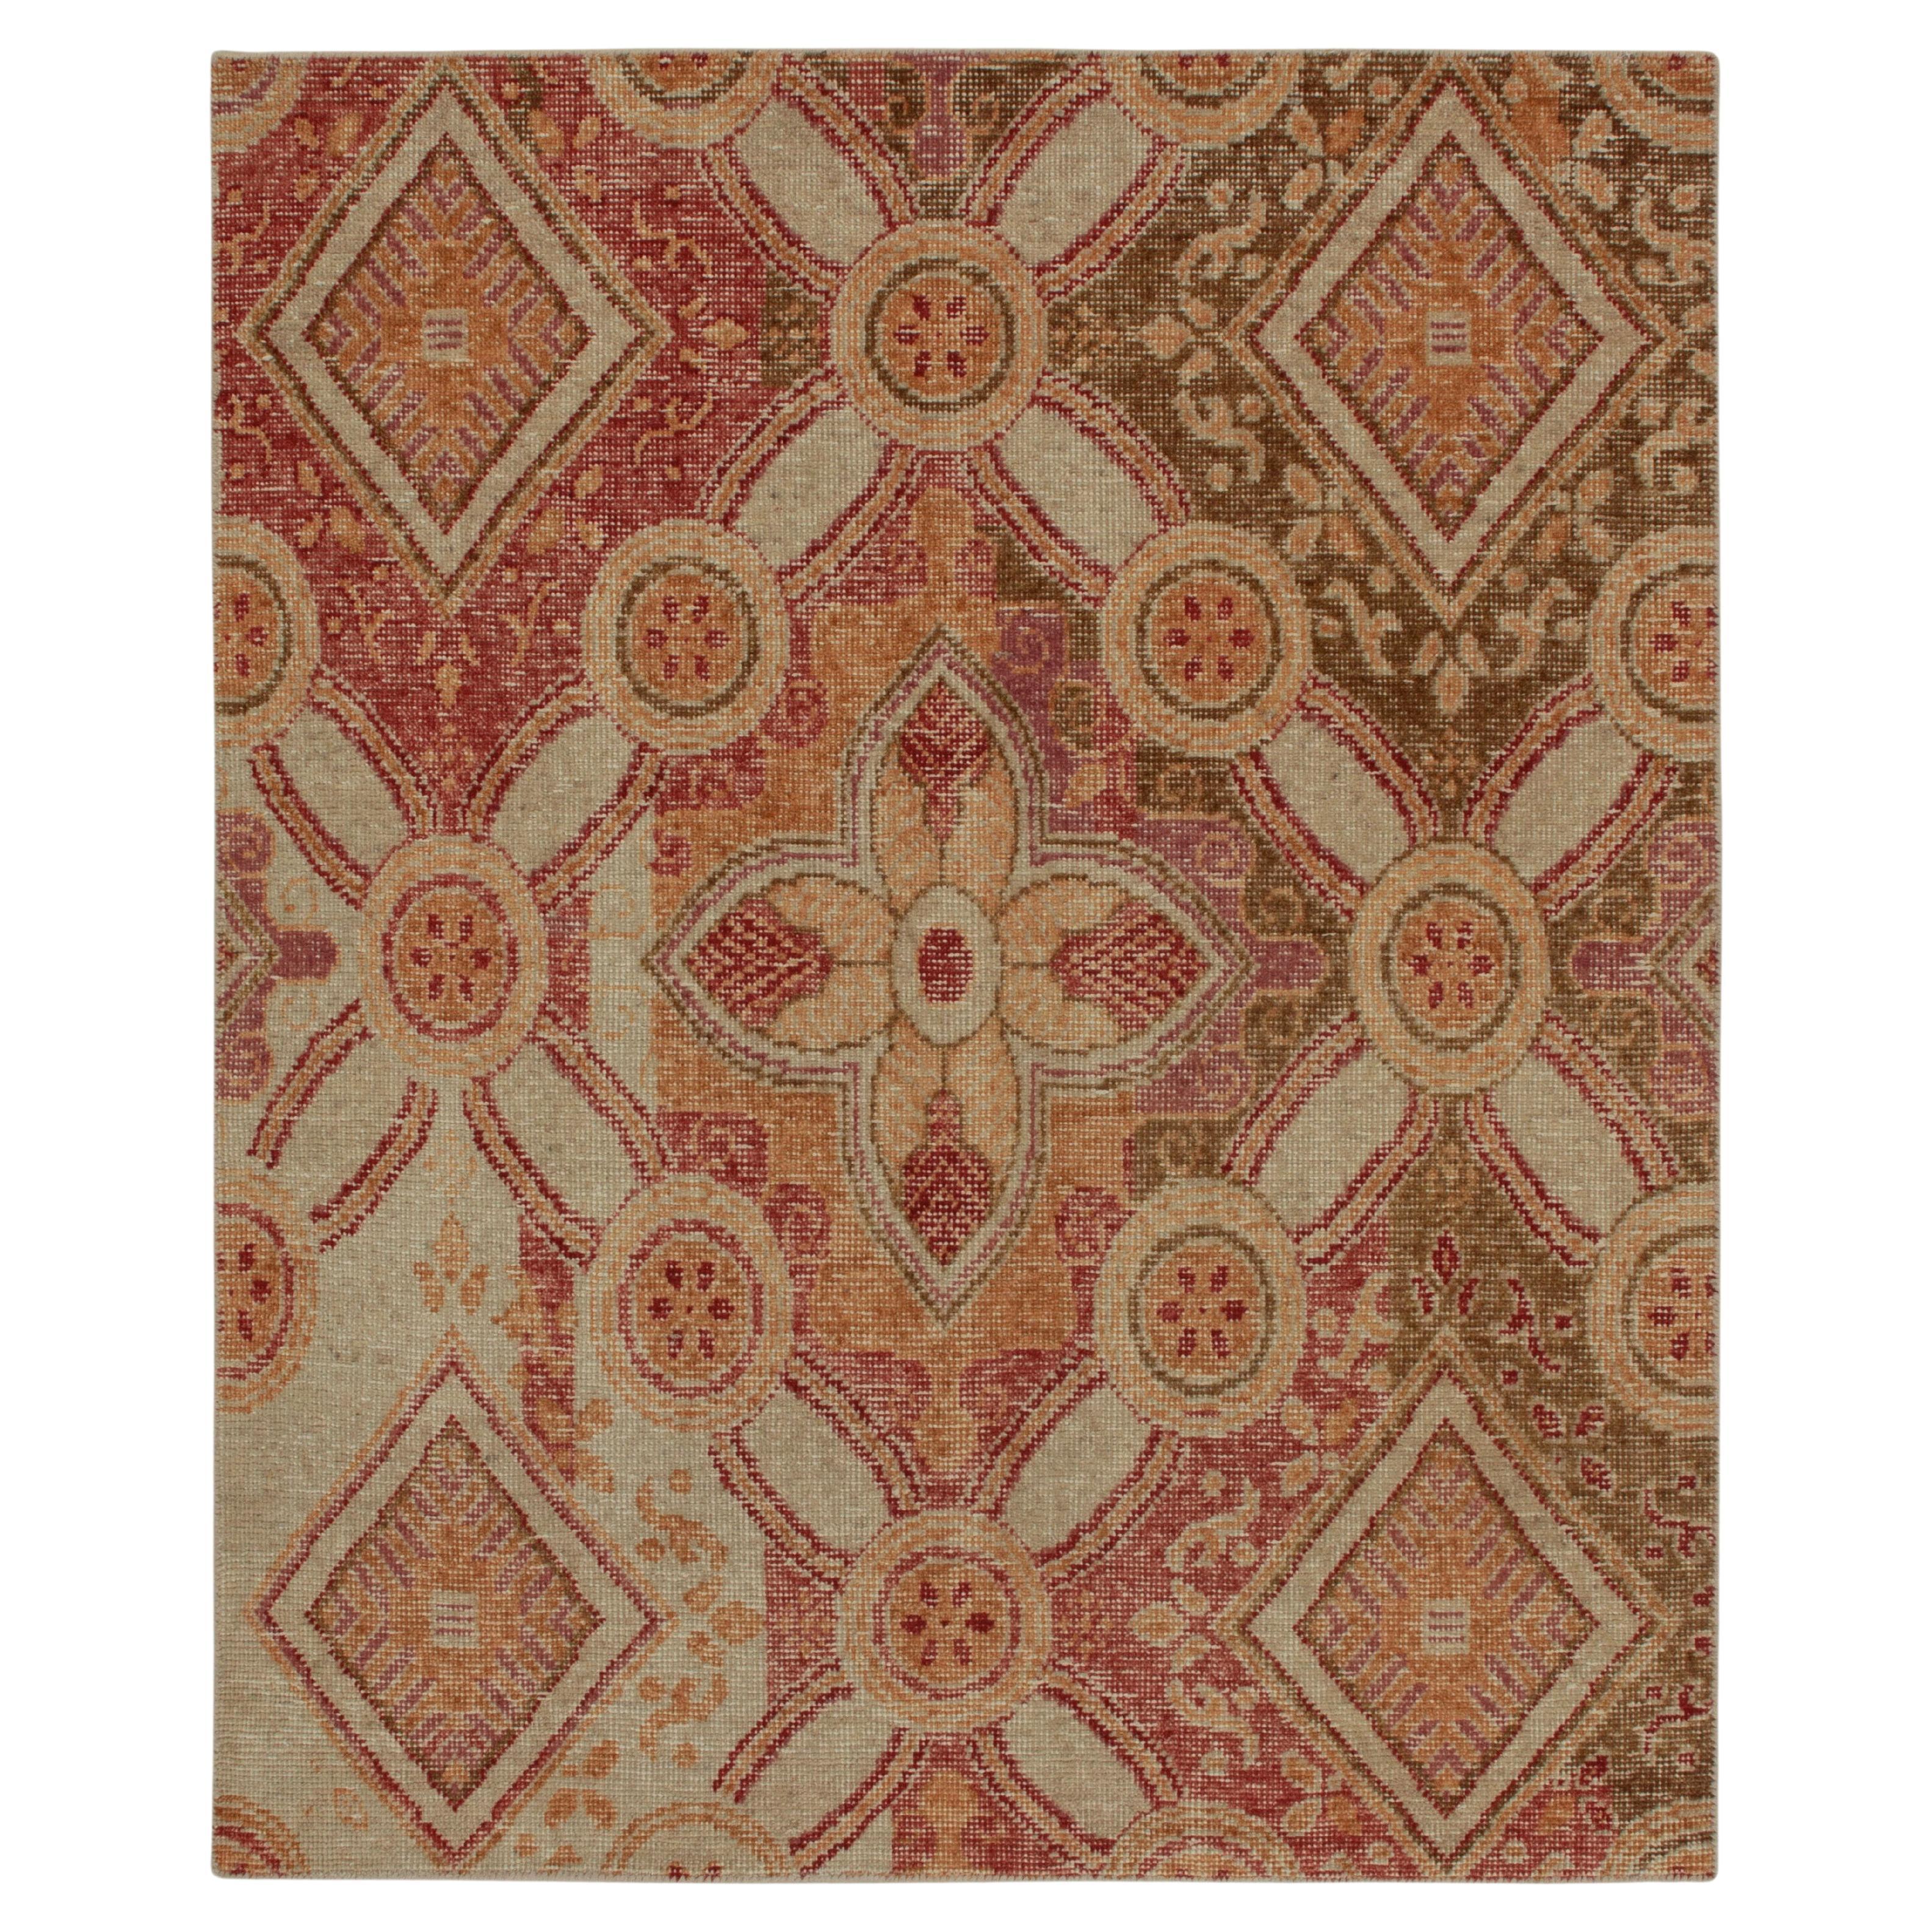 Rug & Kilim’s Distressed Style Rug in Red, Green, Gold, White Trellises For Sale